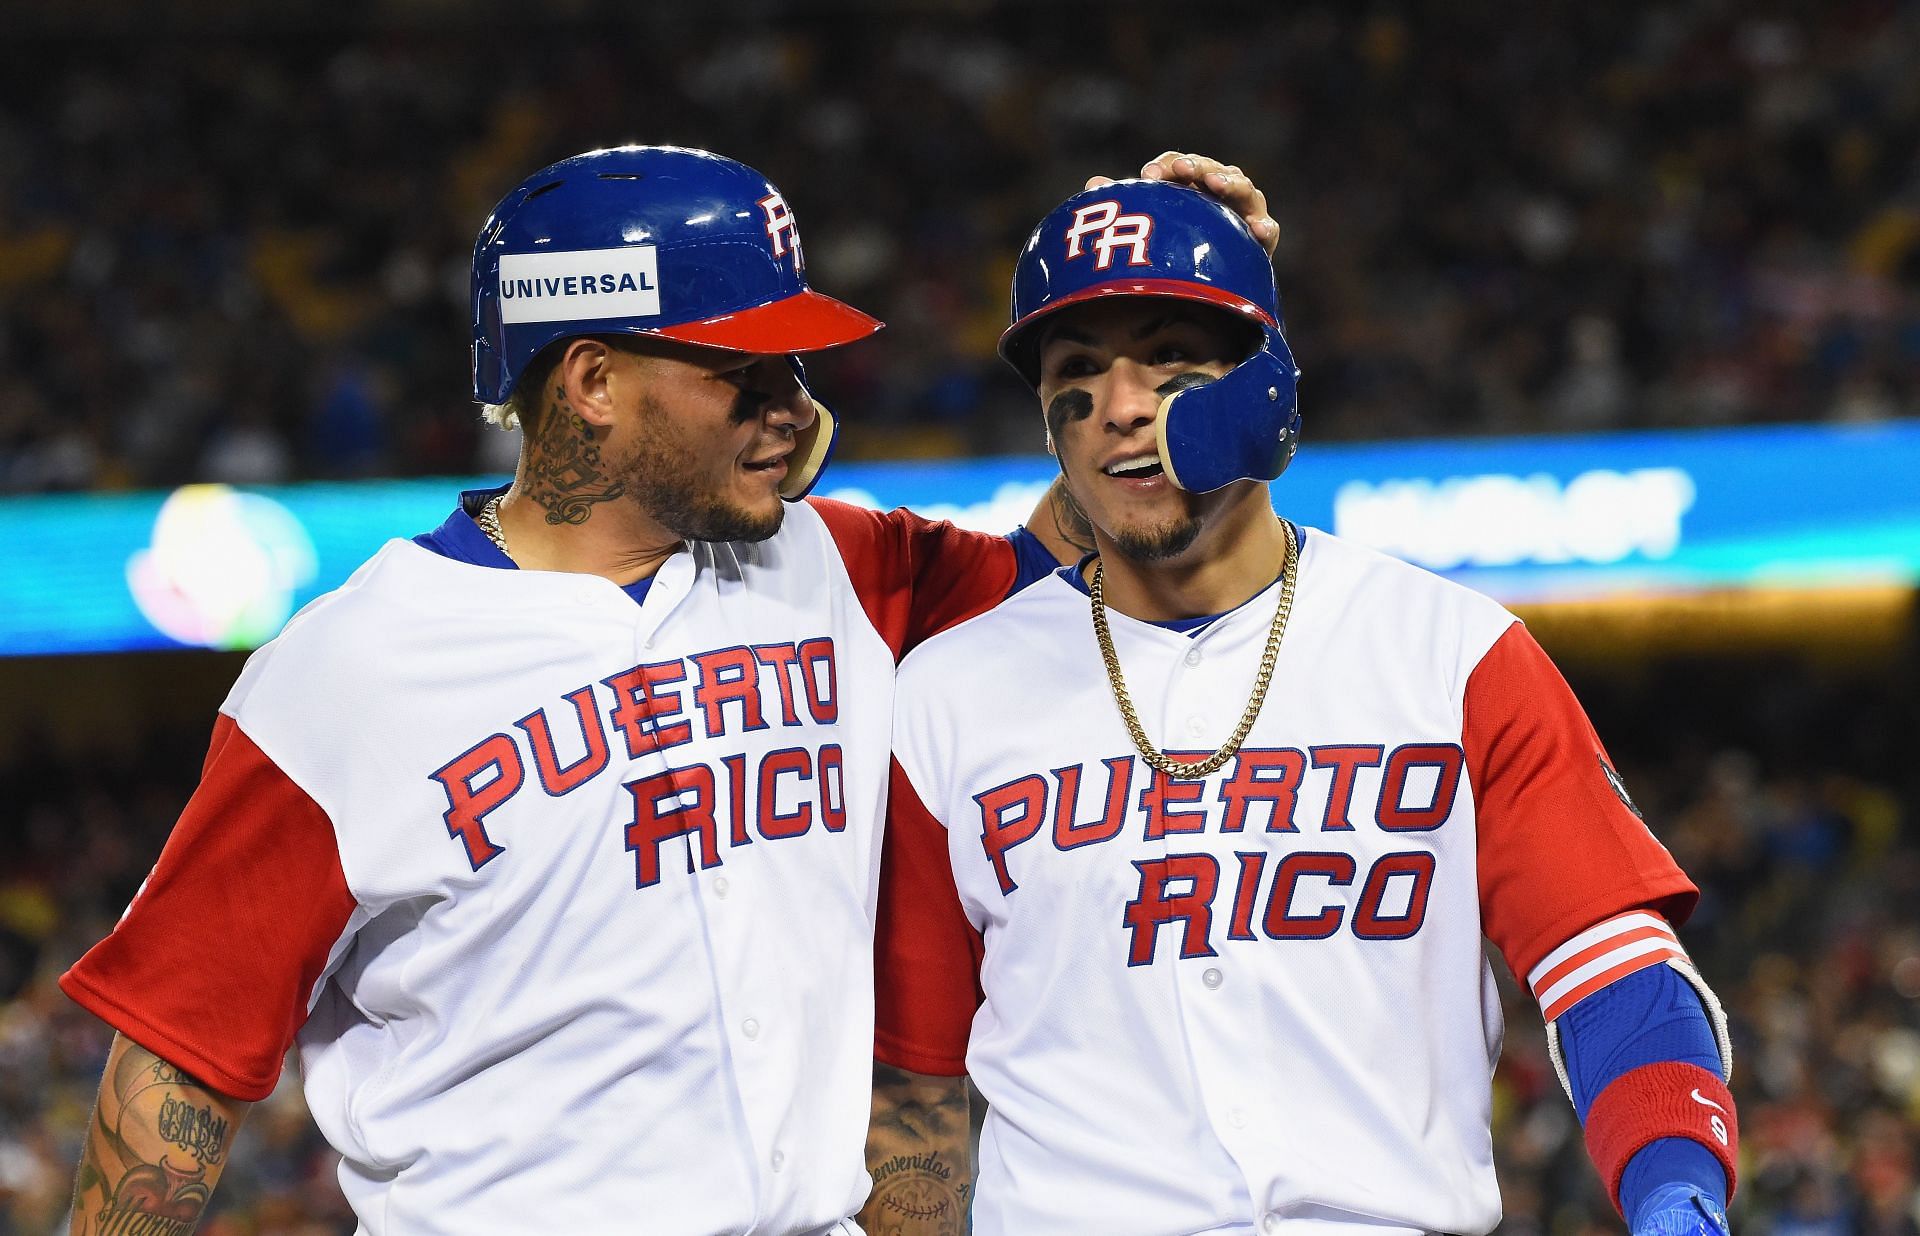 Yadier Molina #4 and Javier Baez #9 of team Puerto Rico walk into the dugout during Game 3 of the Championship Round of the 2017 World Baseball Classic